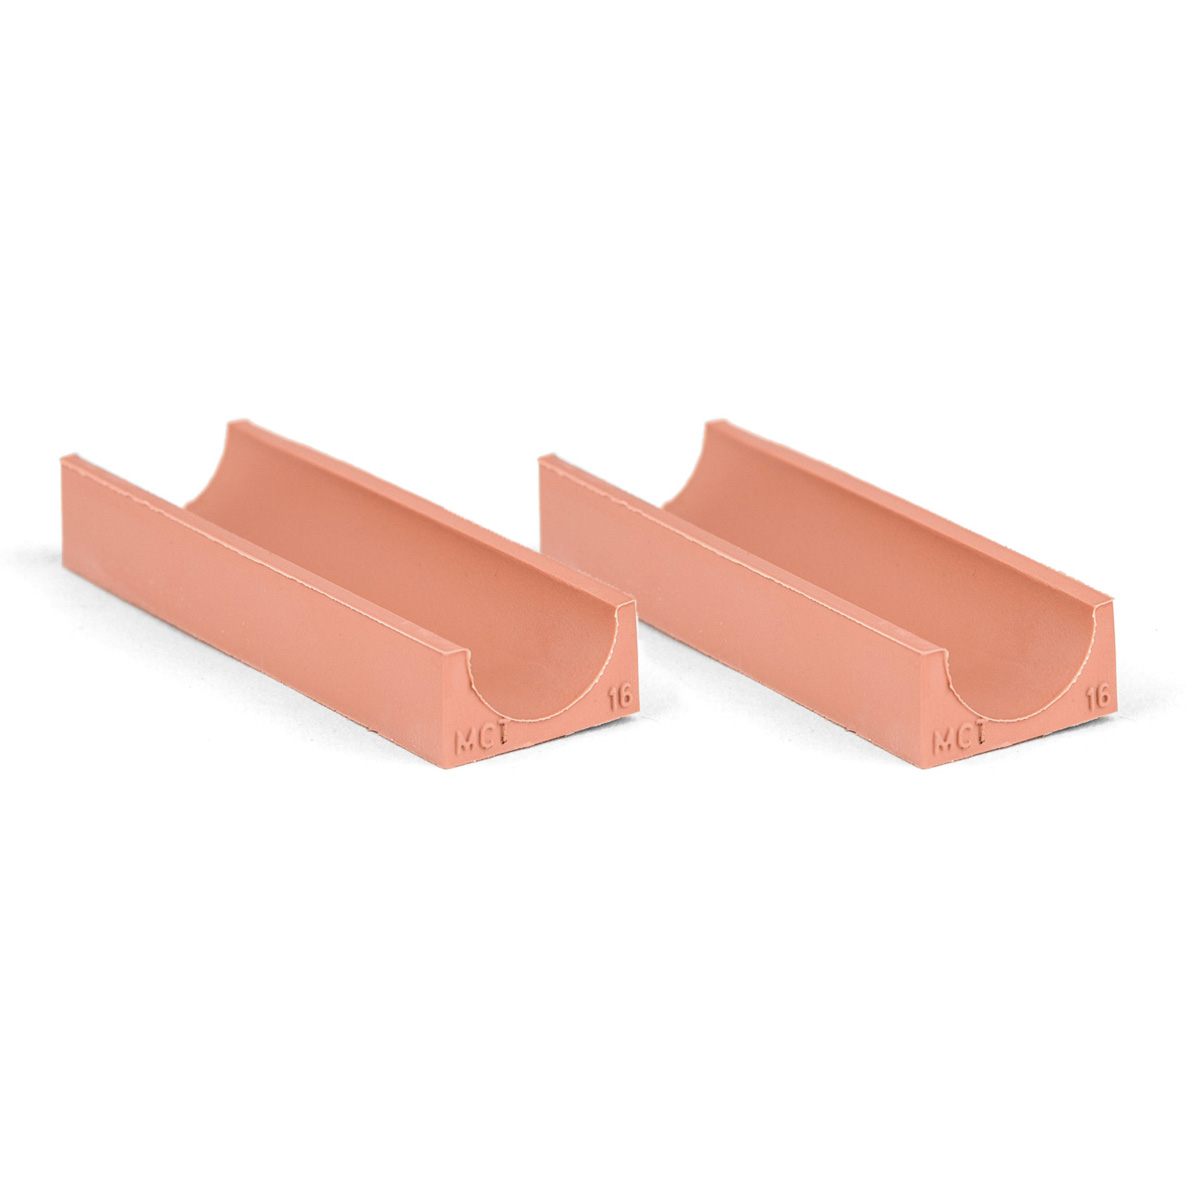 20-16*2 Set of 2 half insert block lycron 30mm, 20-16 for cable/pipe diam. 15.5-16.5mm